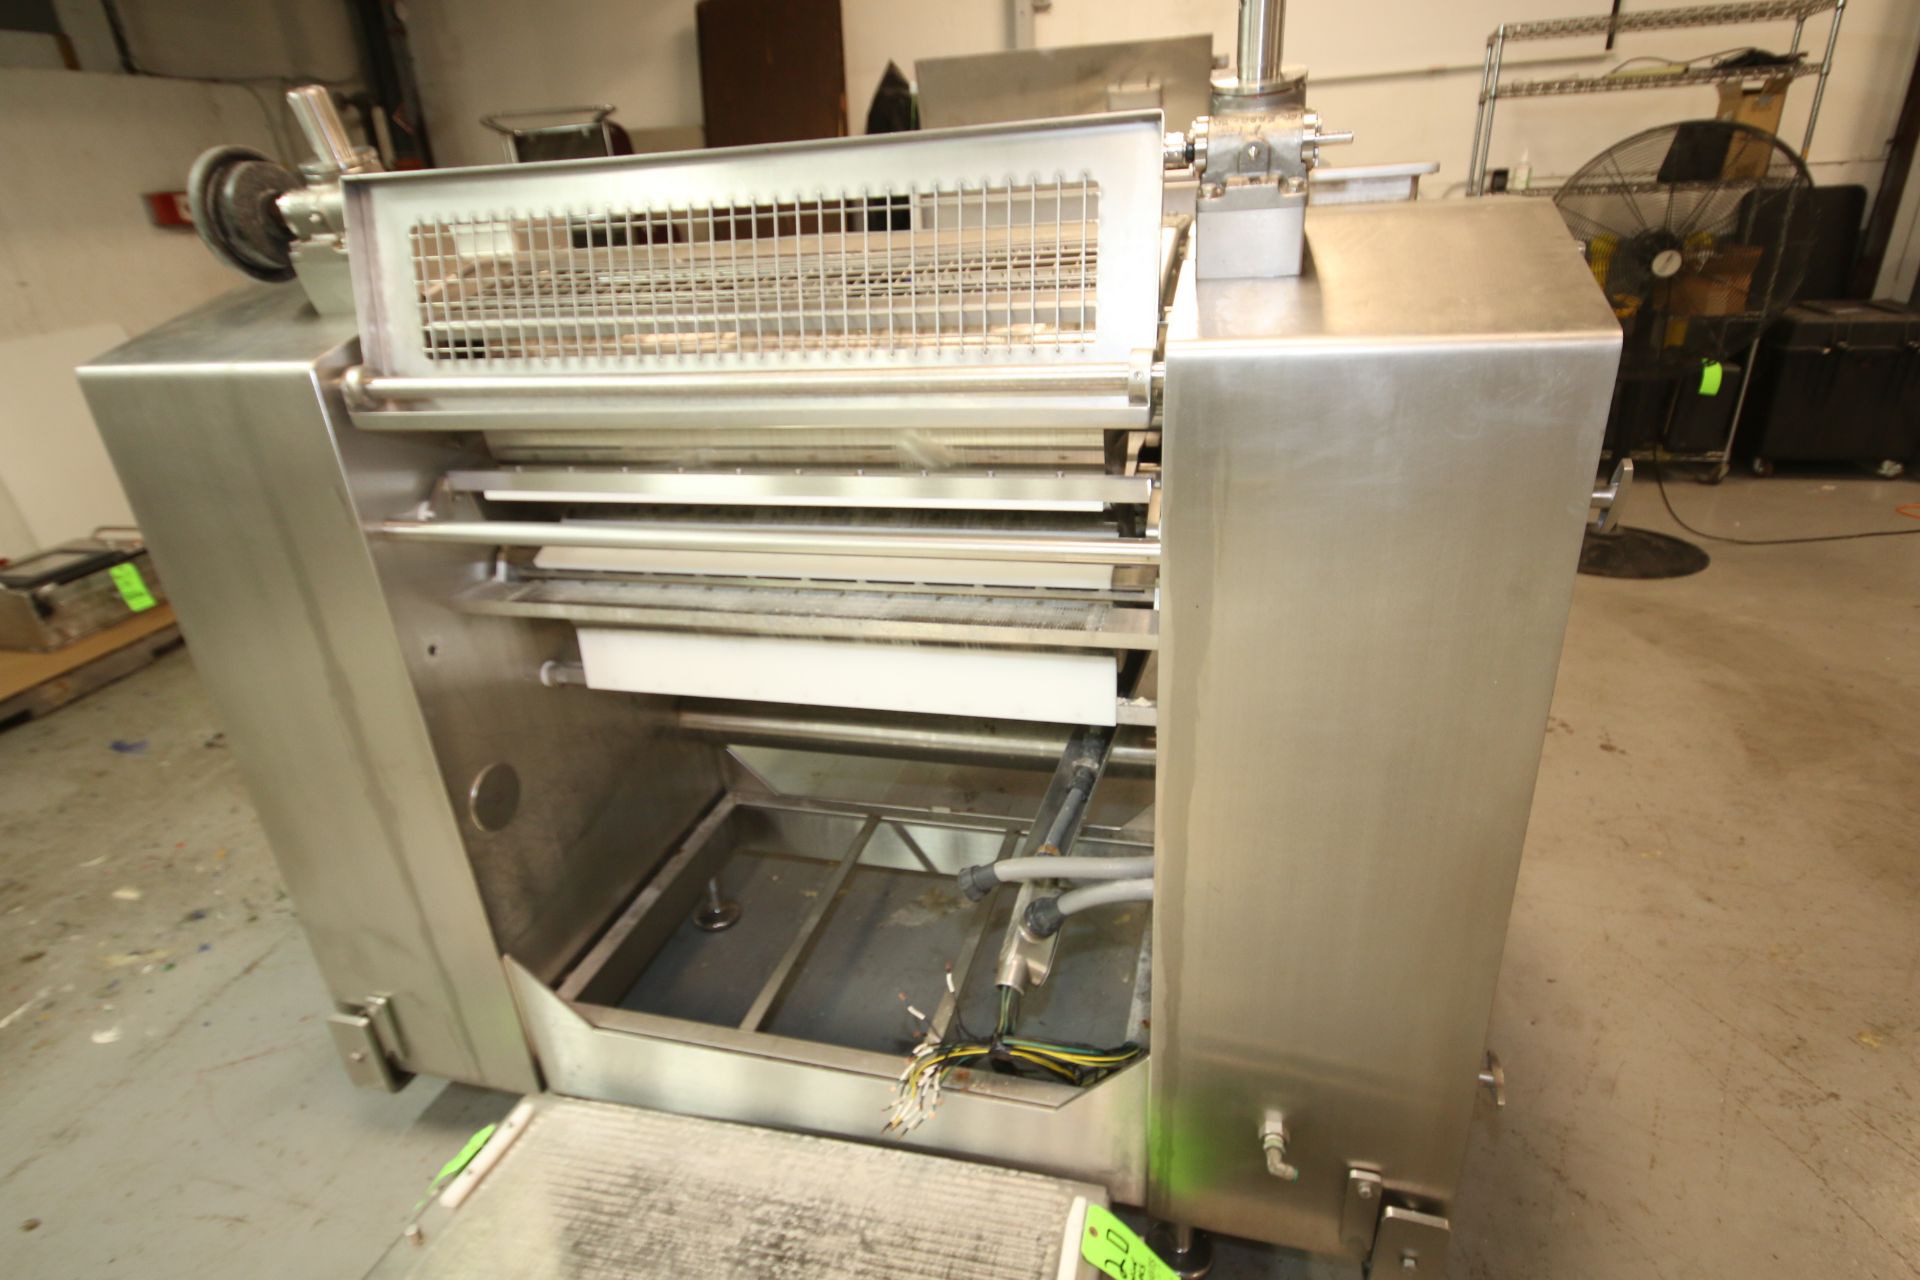 Moline 32" W 2 - Pin Vertical S/S Dough Sheeter, Model 10-32VR, SN 05-J 219172, with Adjustable - Image 3 of 19